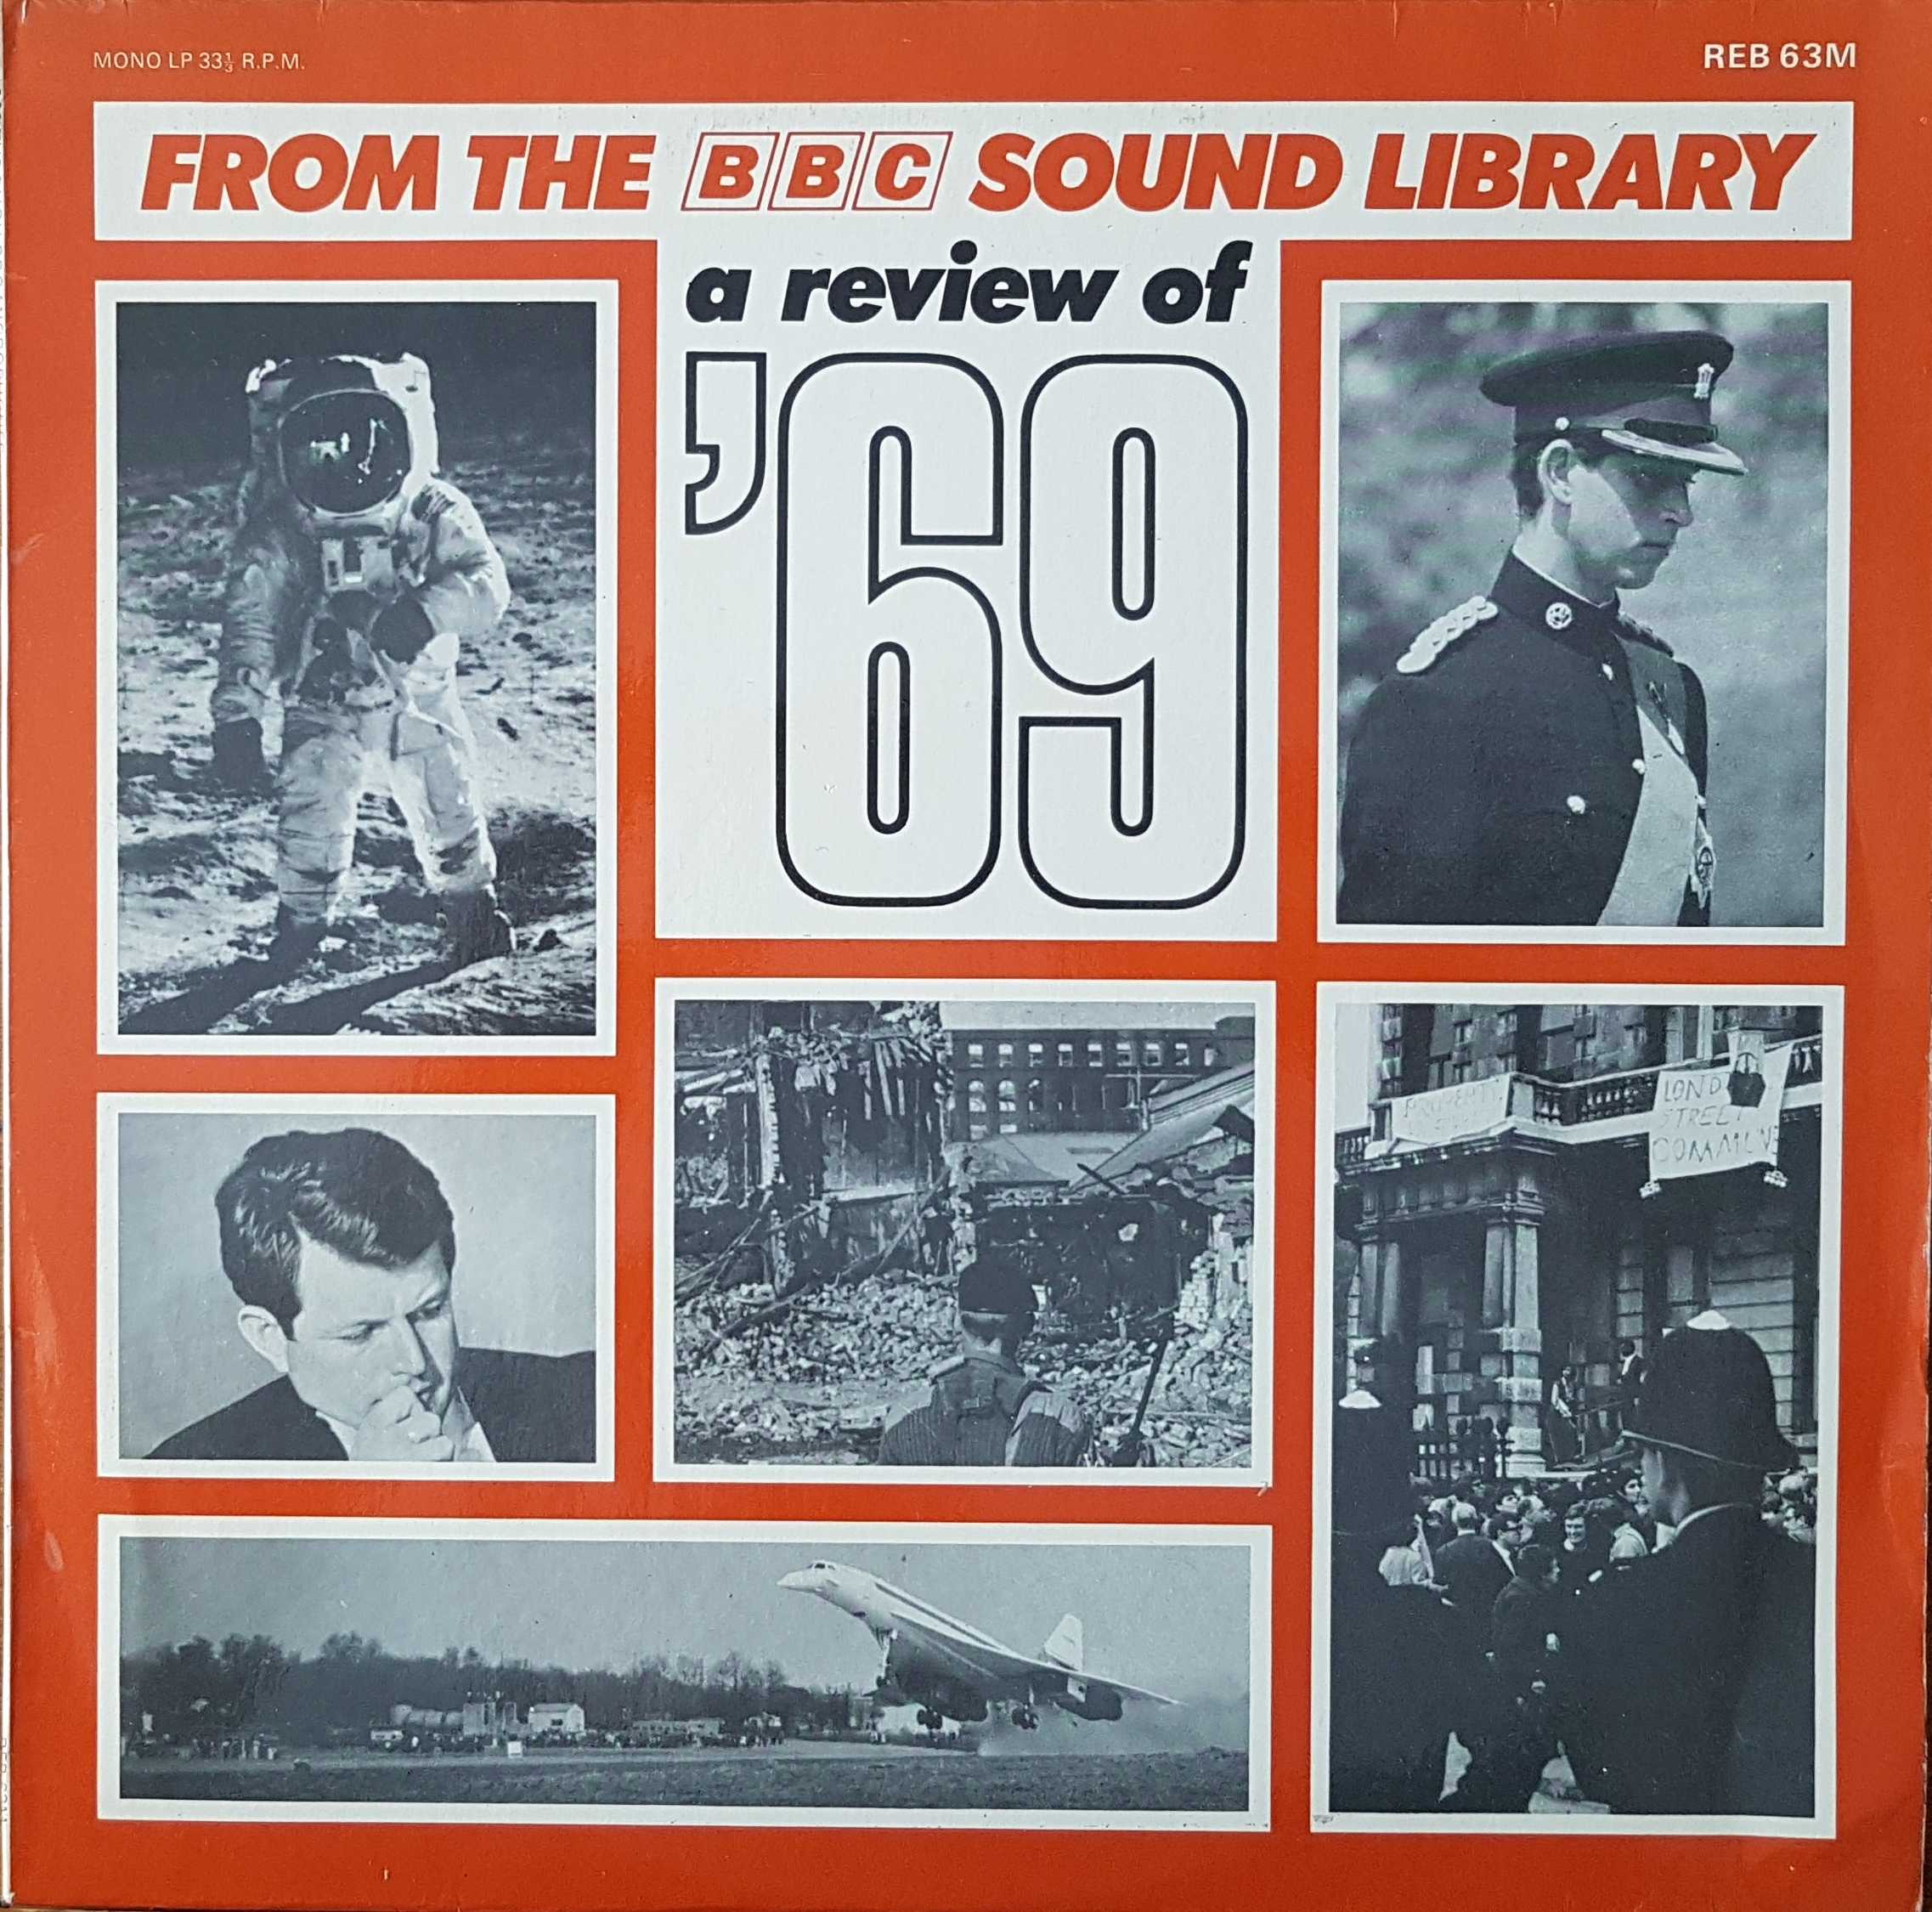 Picture of REB 63 A review of 1969 by artist Various / Derek Cooper from the BBC albums - Records and Tapes library